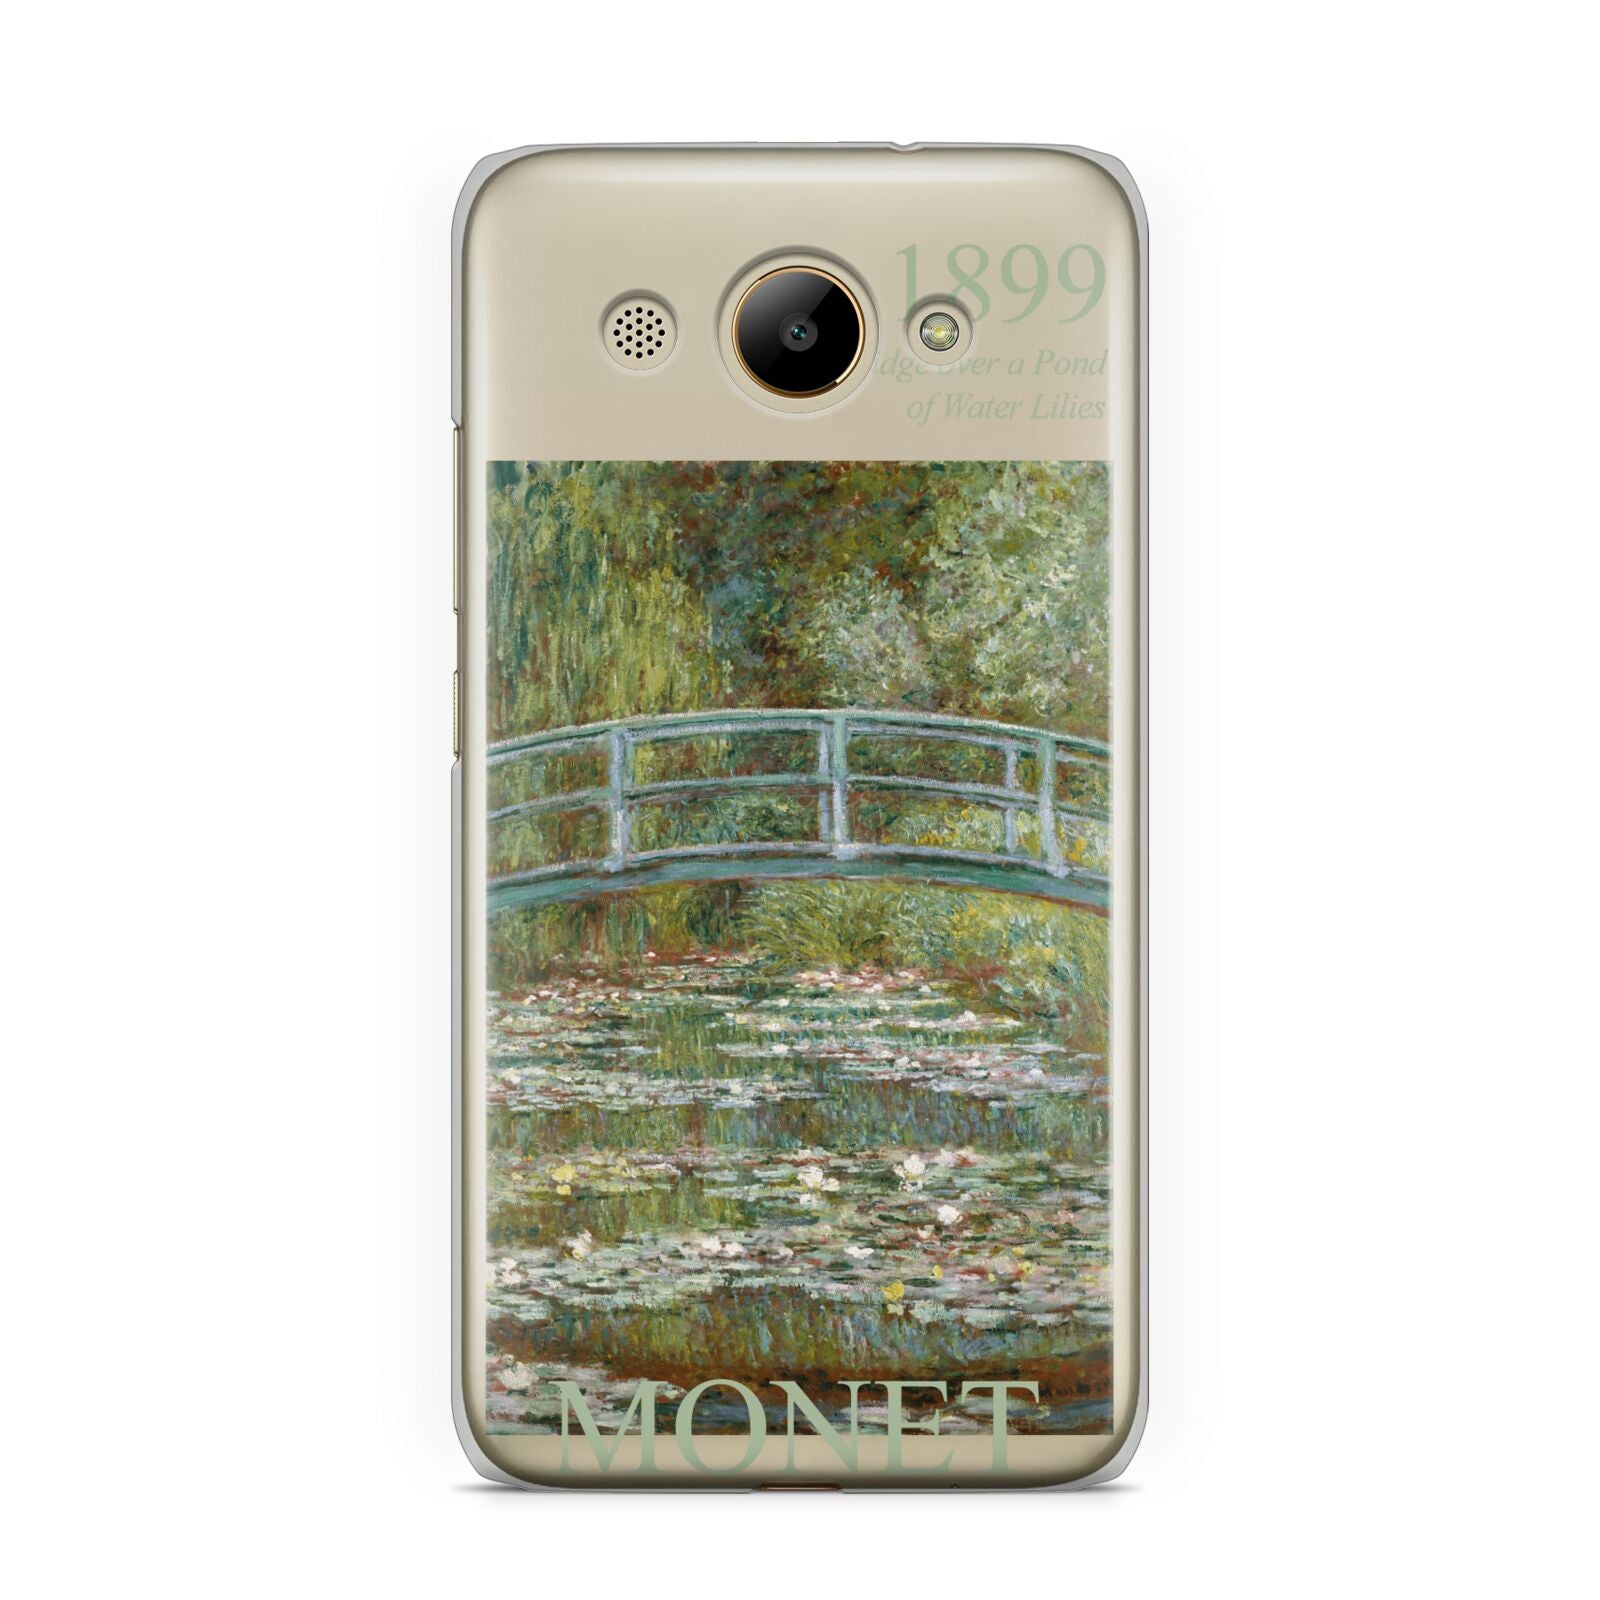 Bridge Over A Pond Of Water Lilies By Monet Huawei Y3 2017